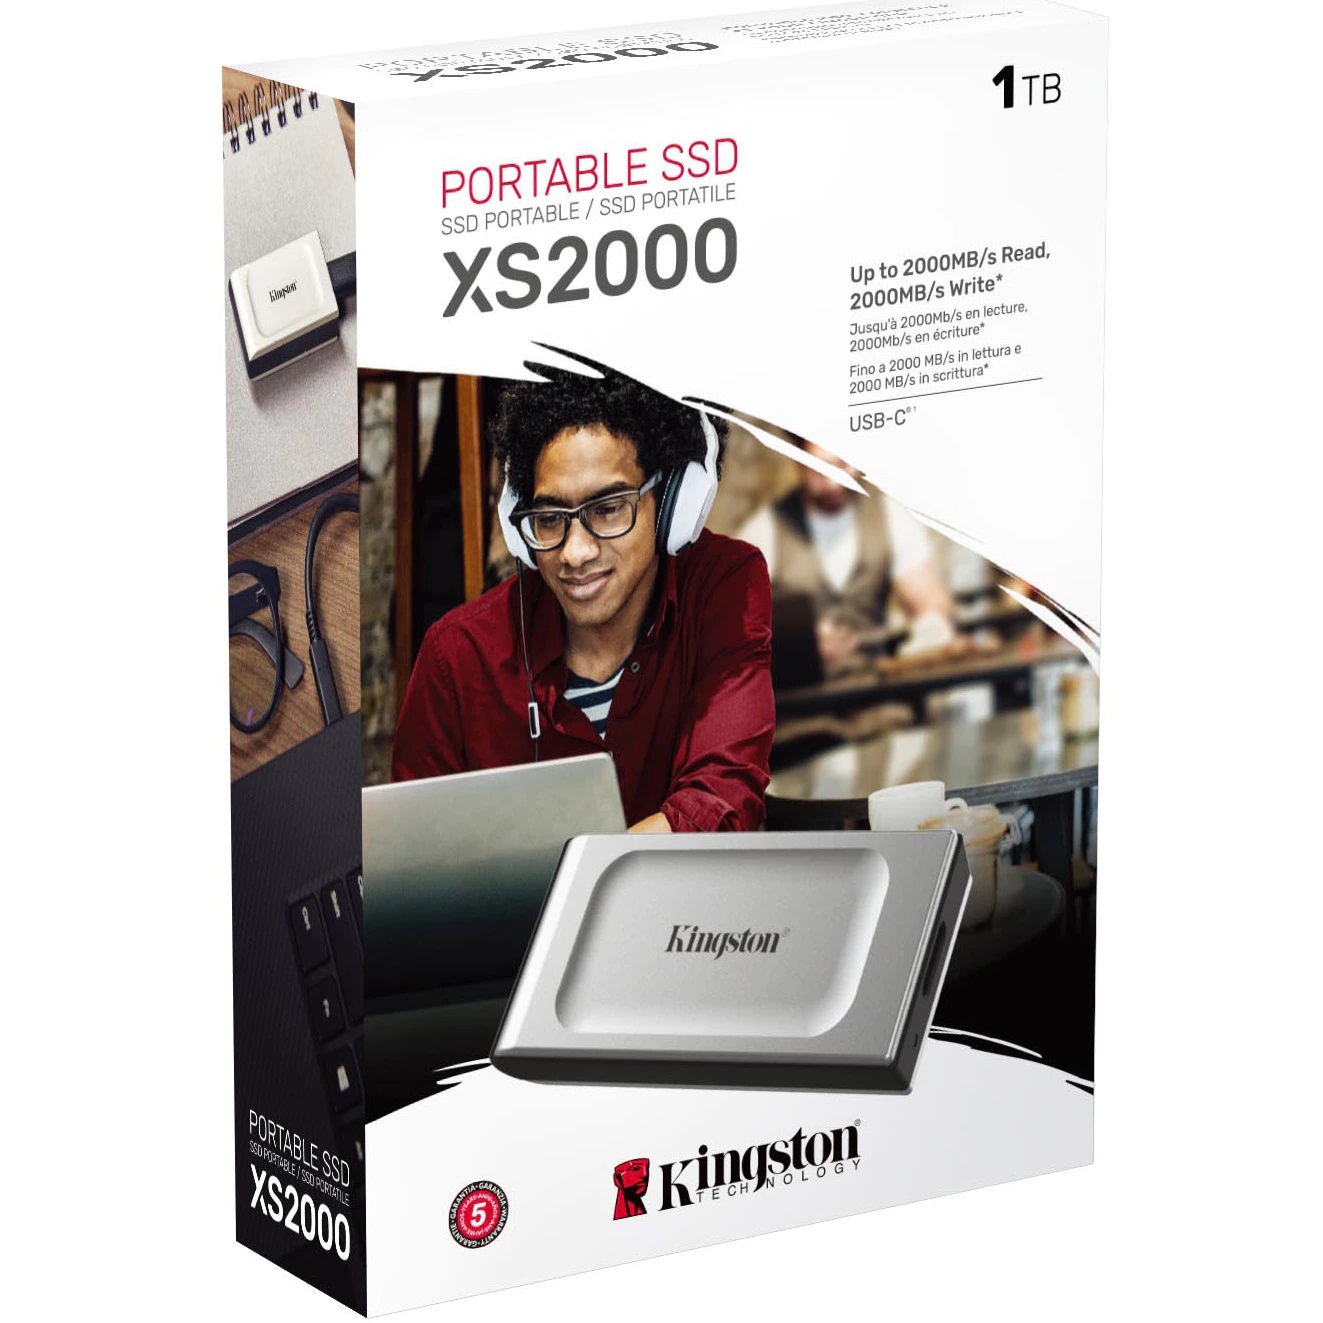 Kingston XS2000 external SSD supported by Hard Disk Sentinel